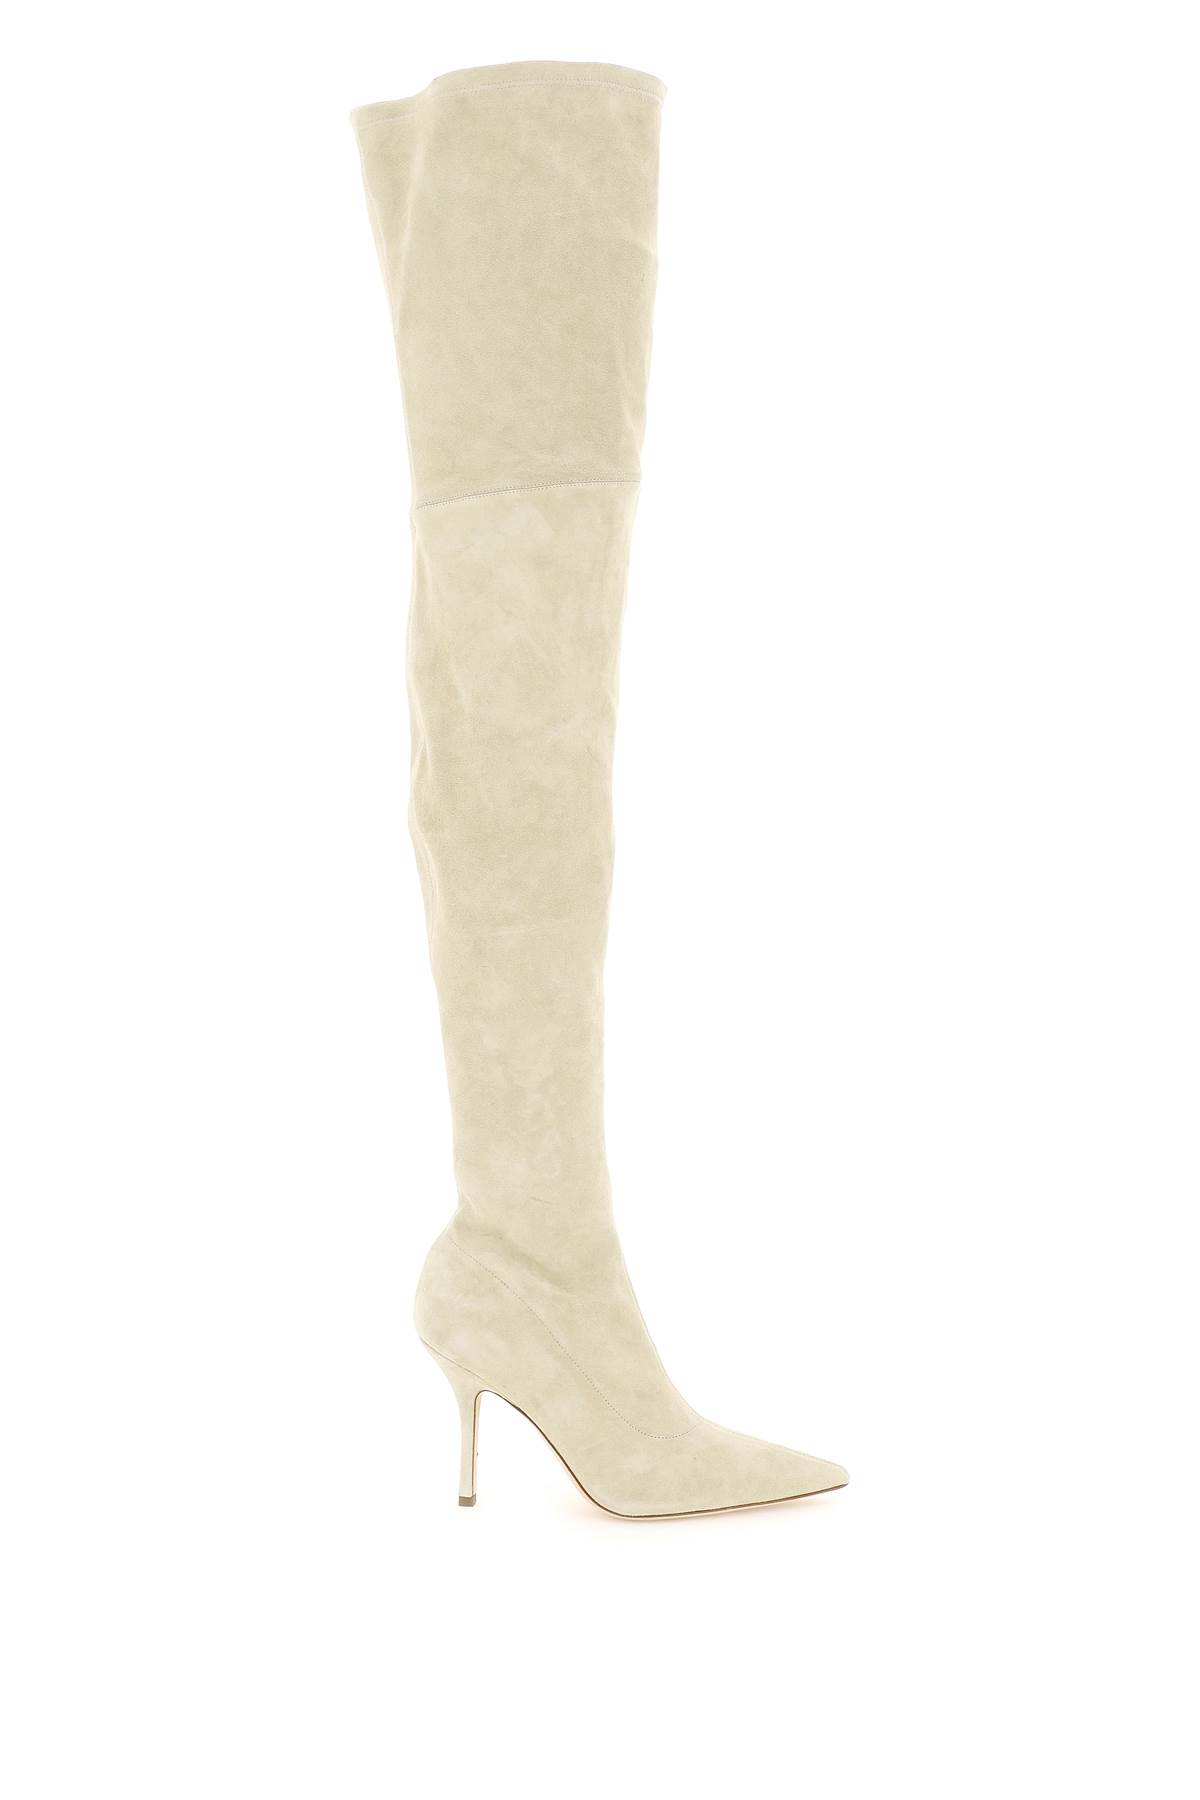 Paris Texas mama Over-the-knee Boots